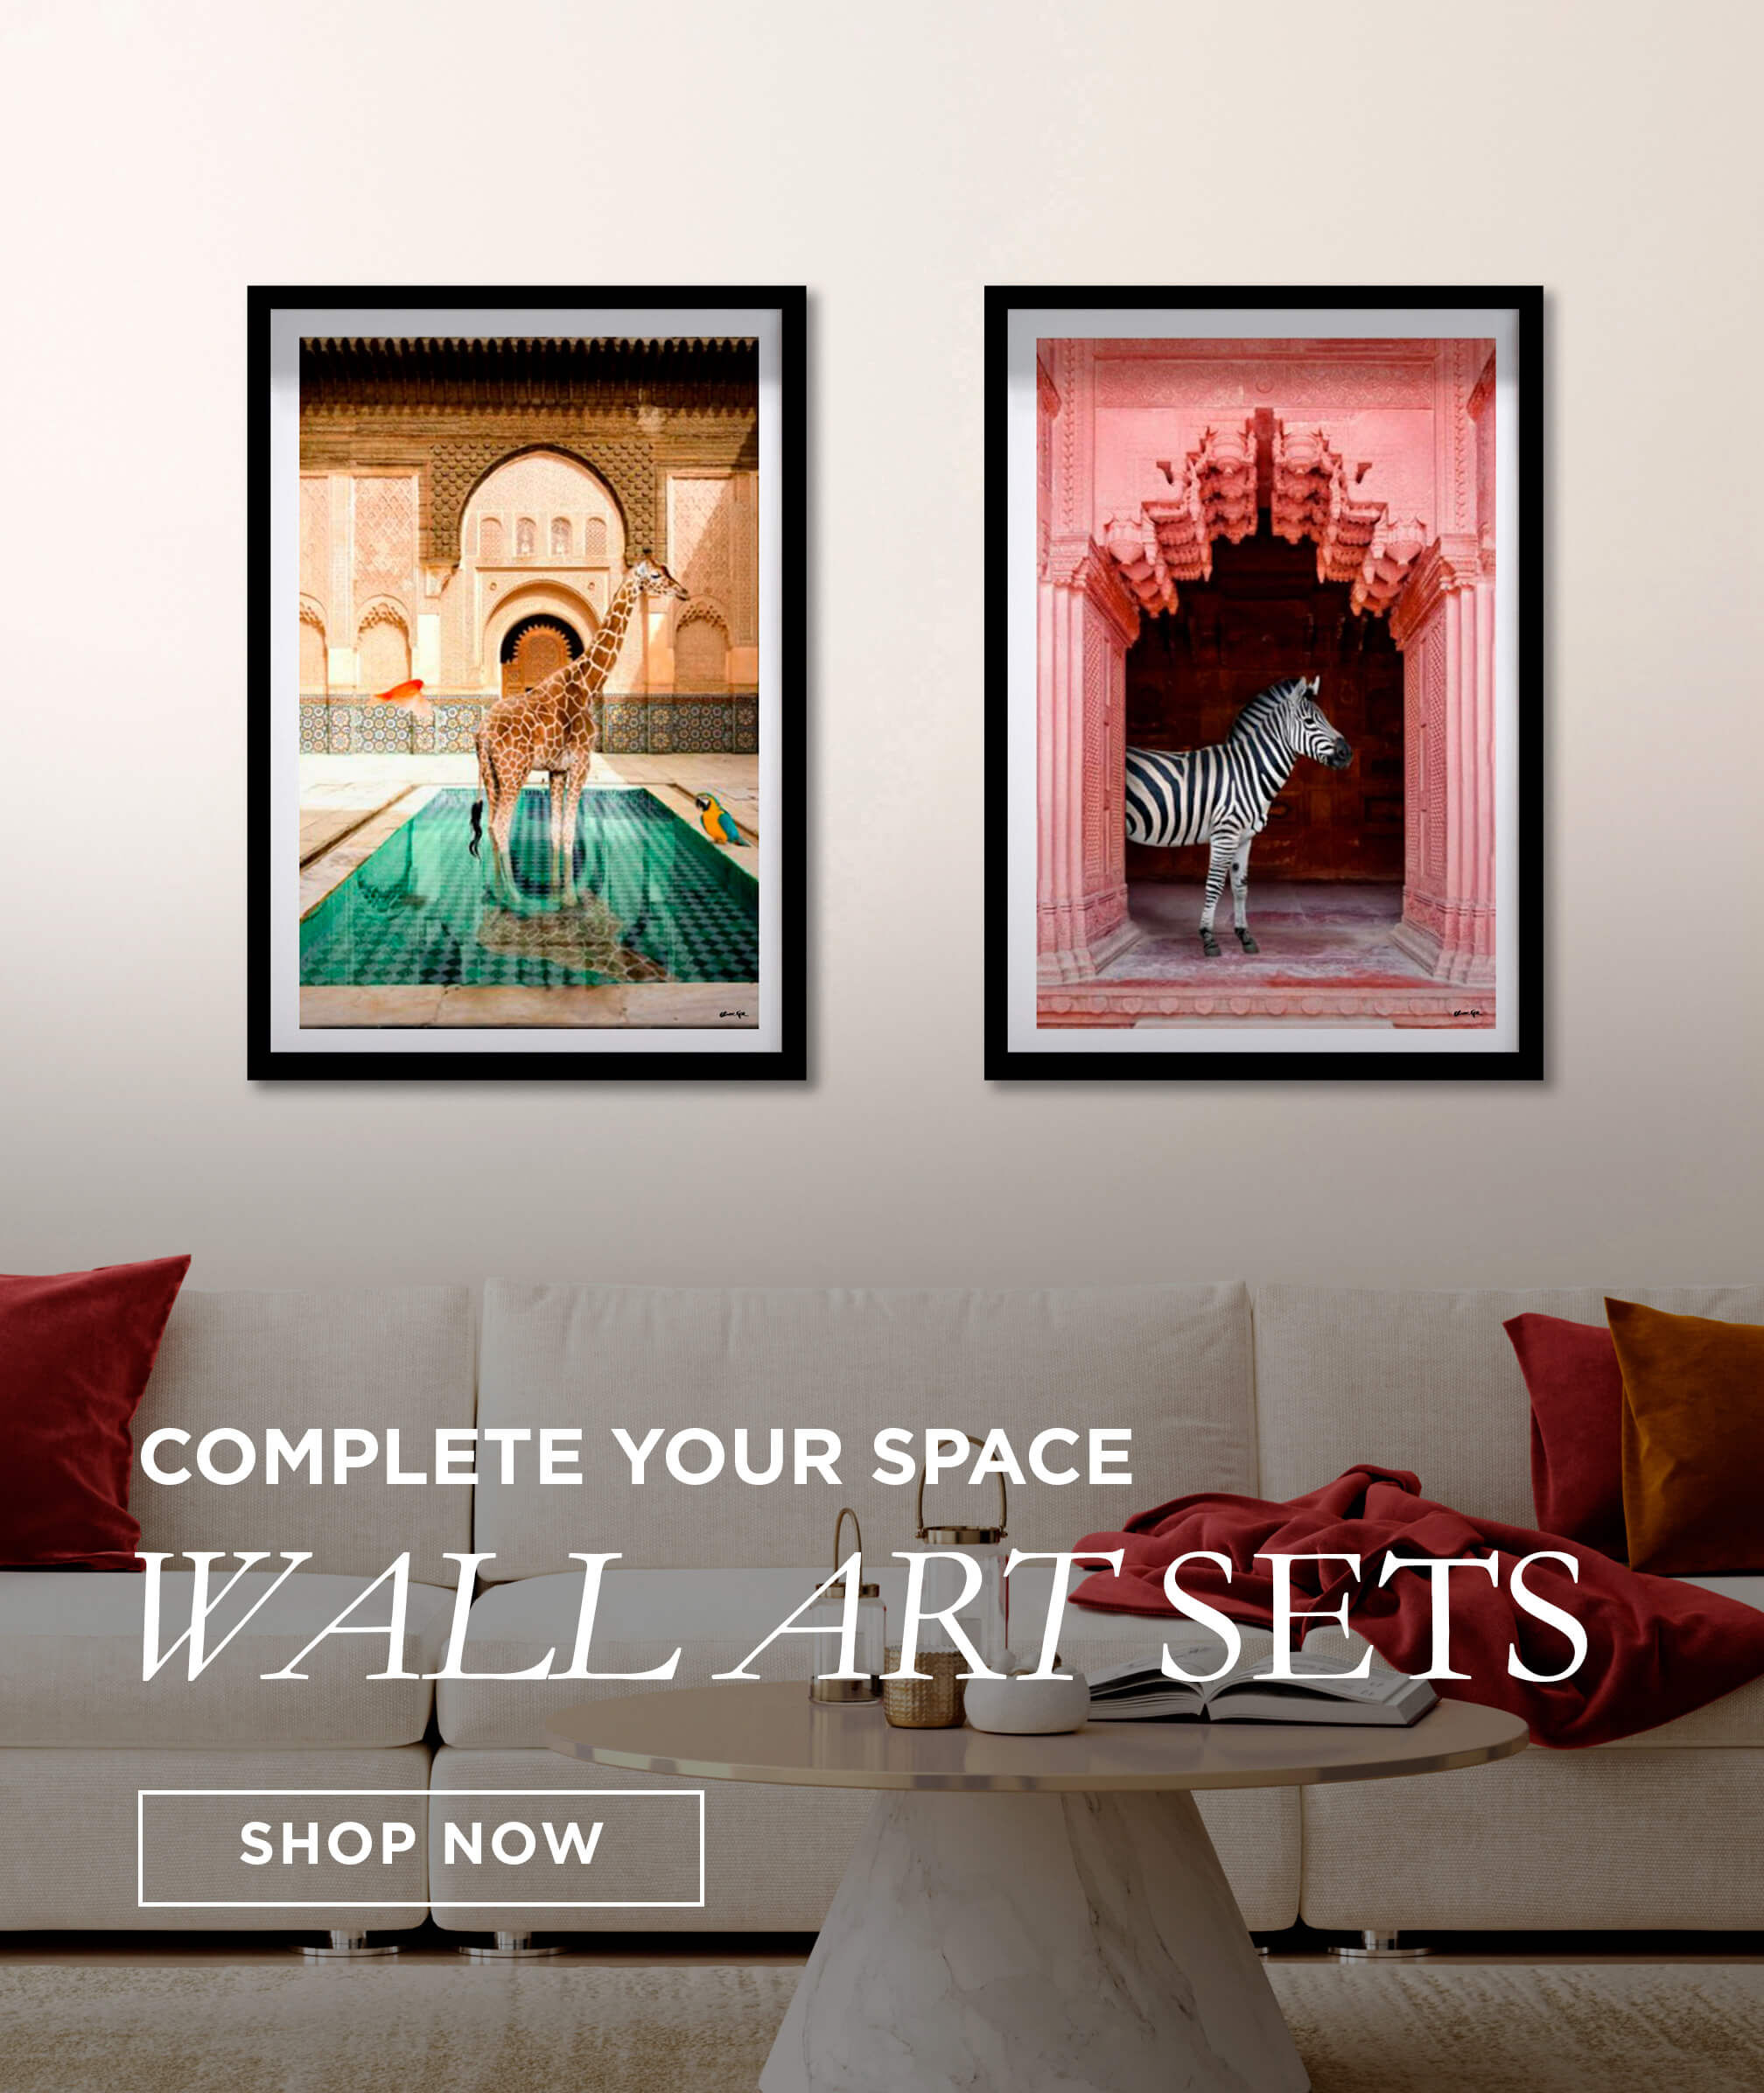 Complete Your Space - Wall Art Sets